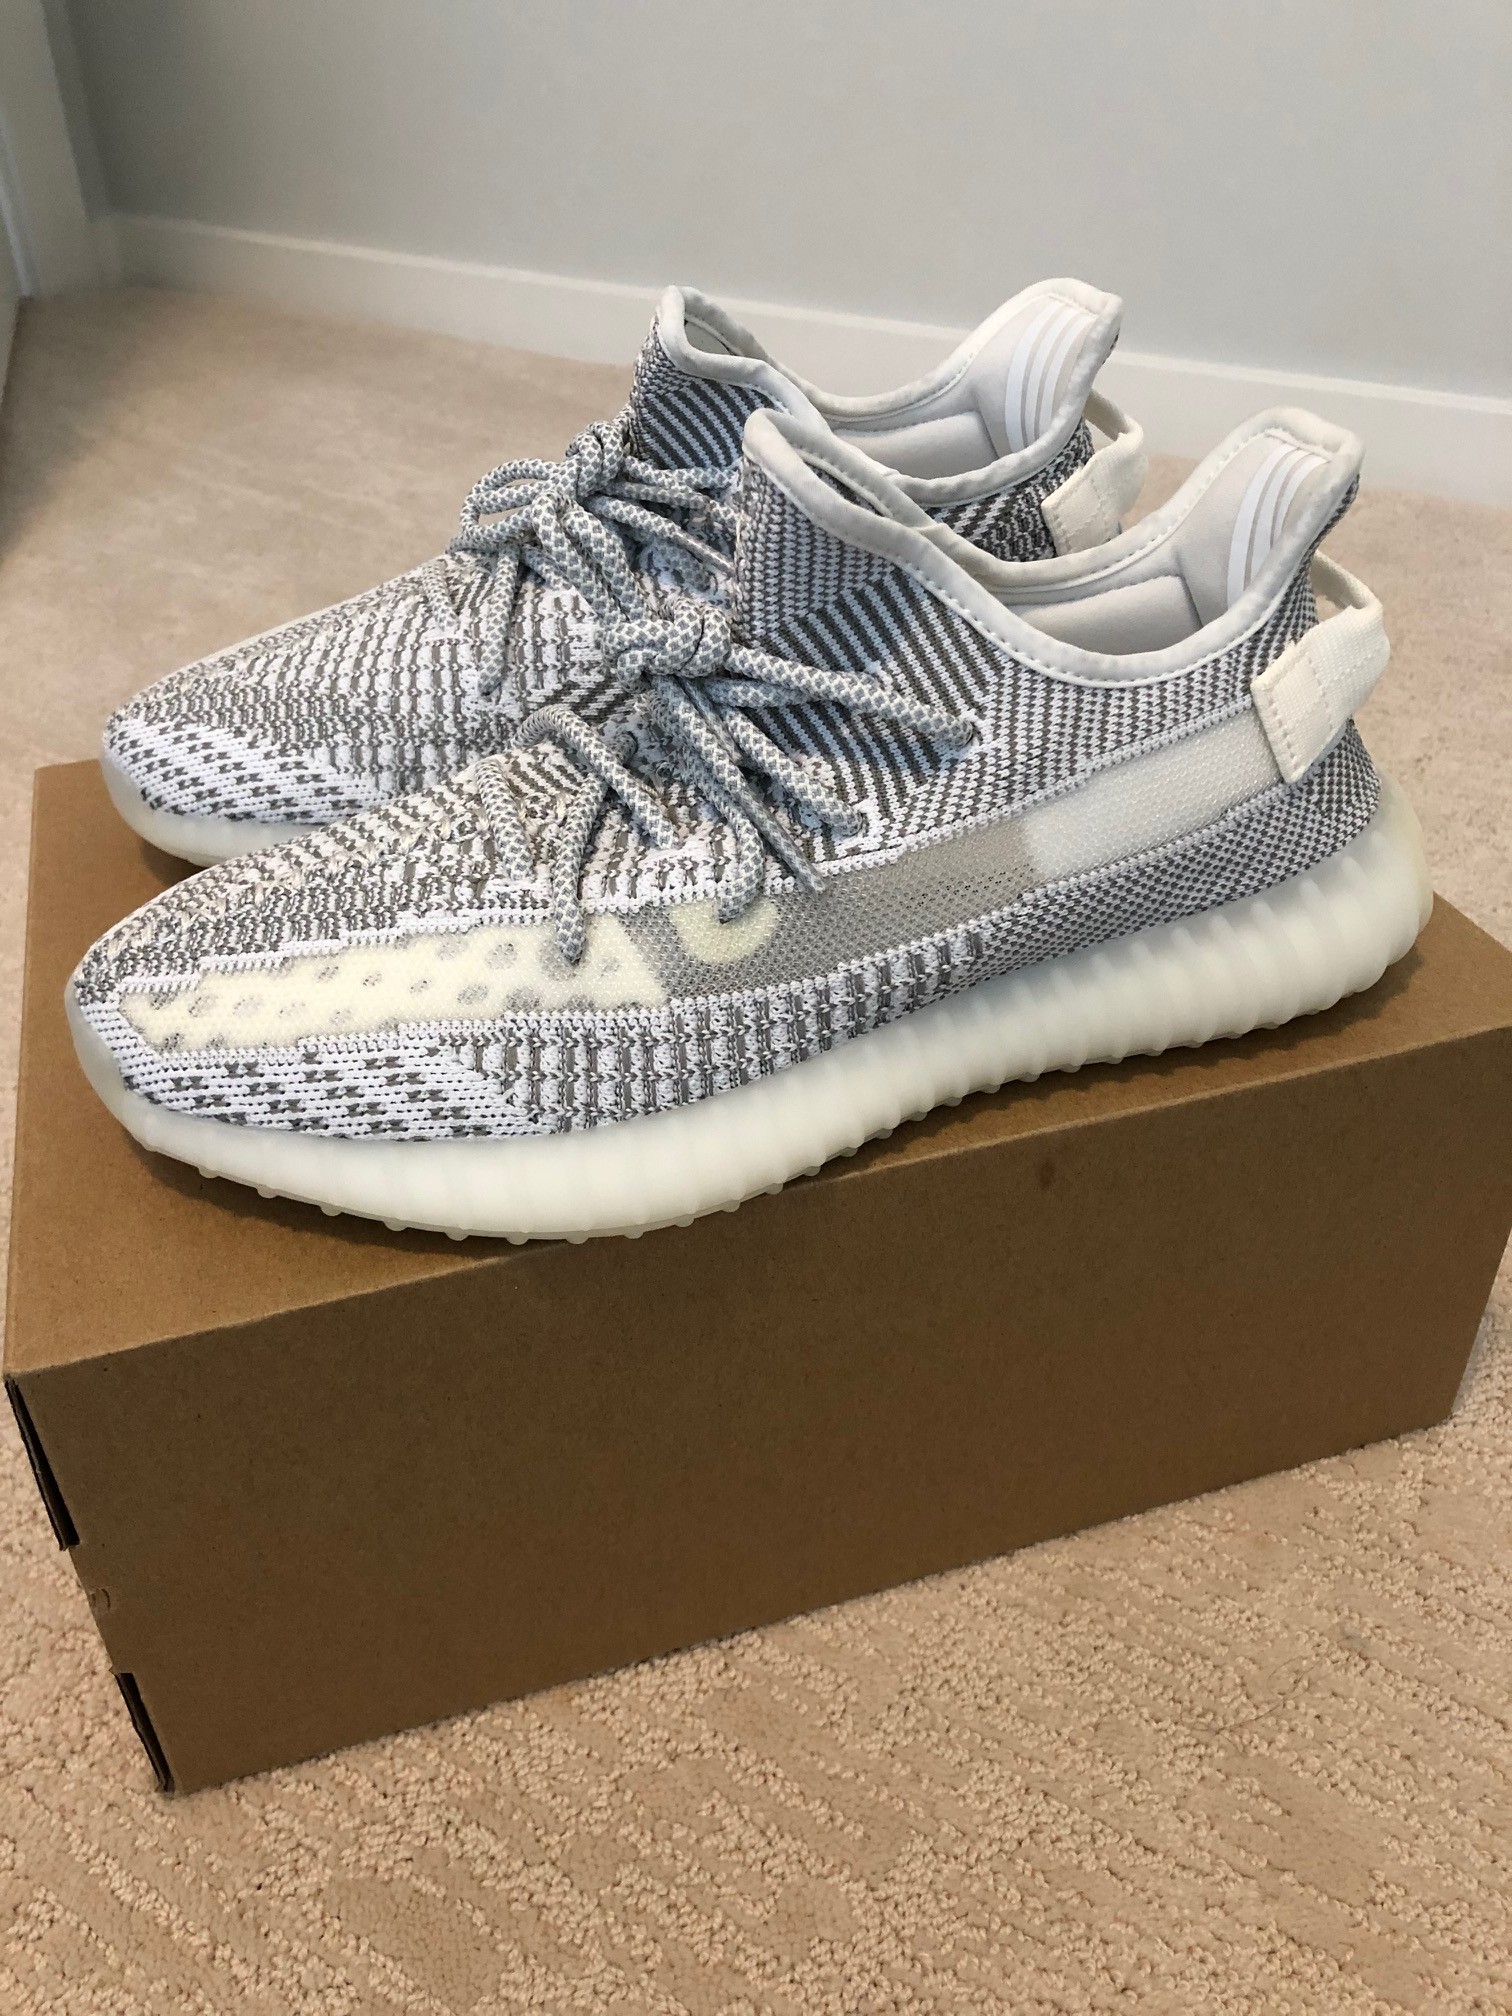 Men's Adidas Yeezy Boost 350 V2 Static Sneaker Shoes SZ 9.5 - Lust4Labels